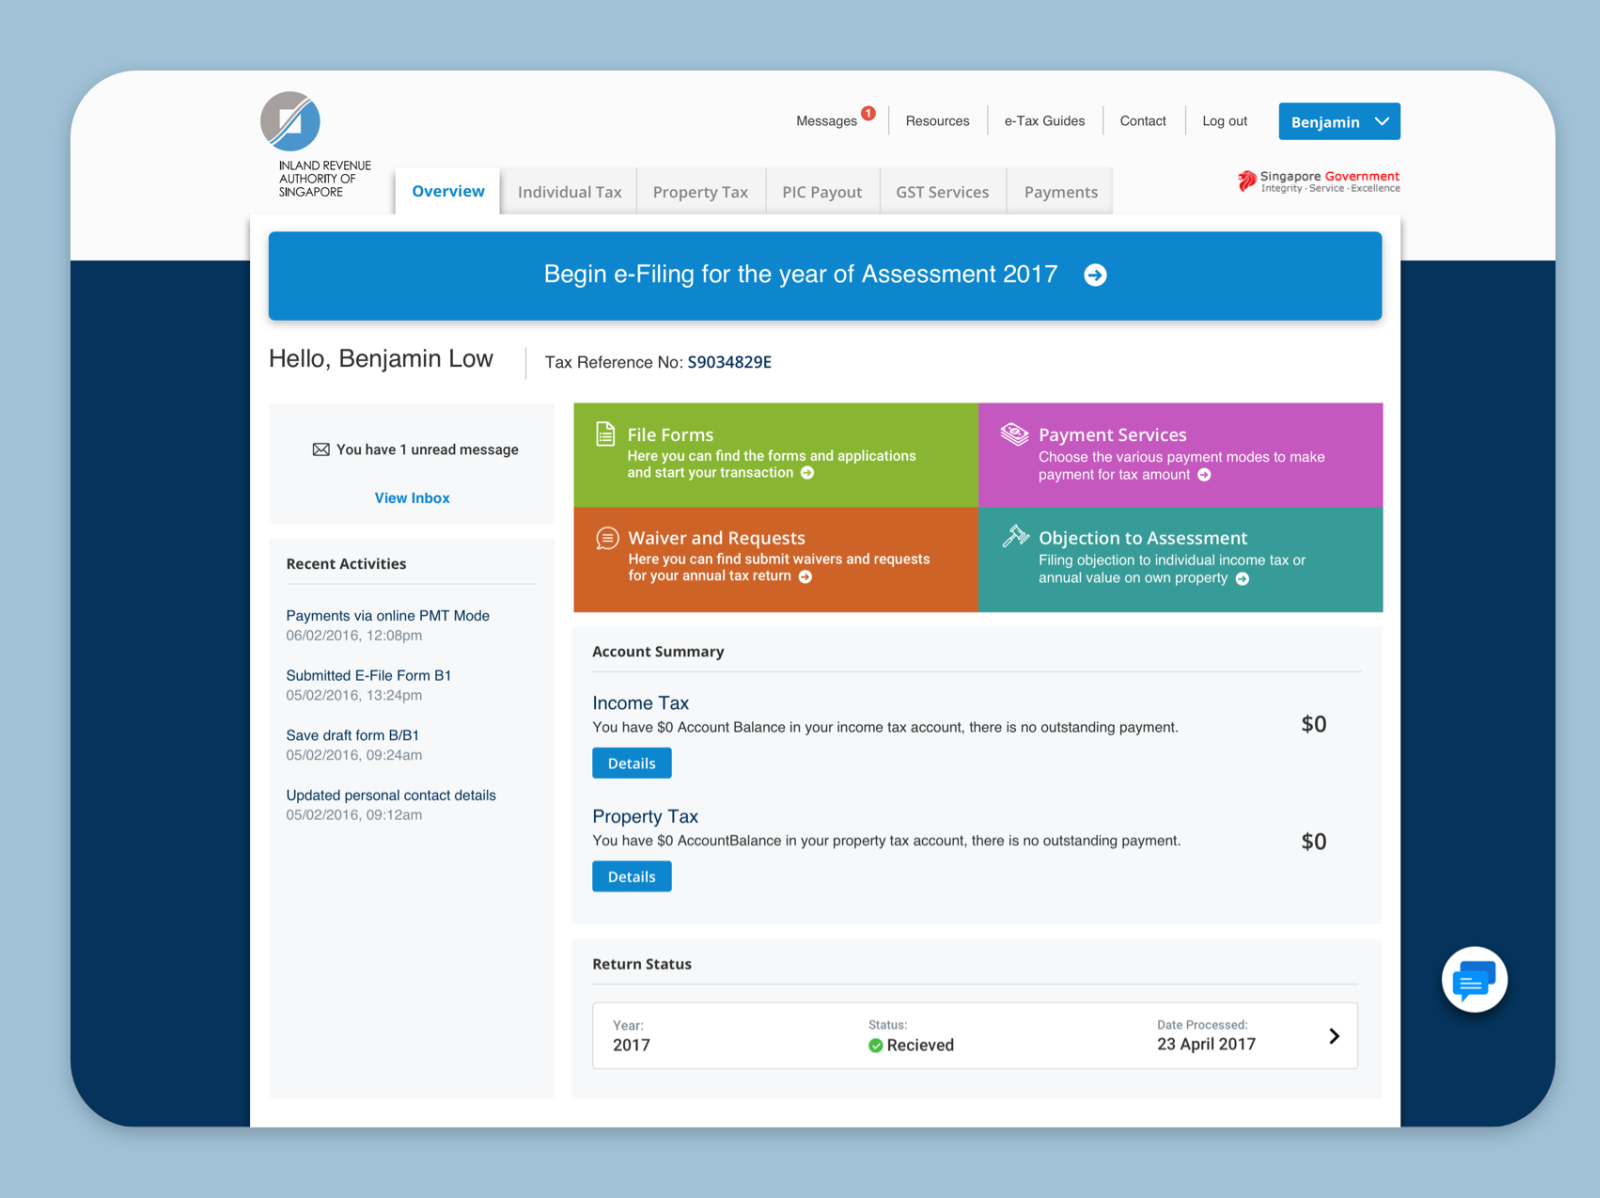 iras-tax-portal-redesigned-by-howie-yeo-on-dribbble